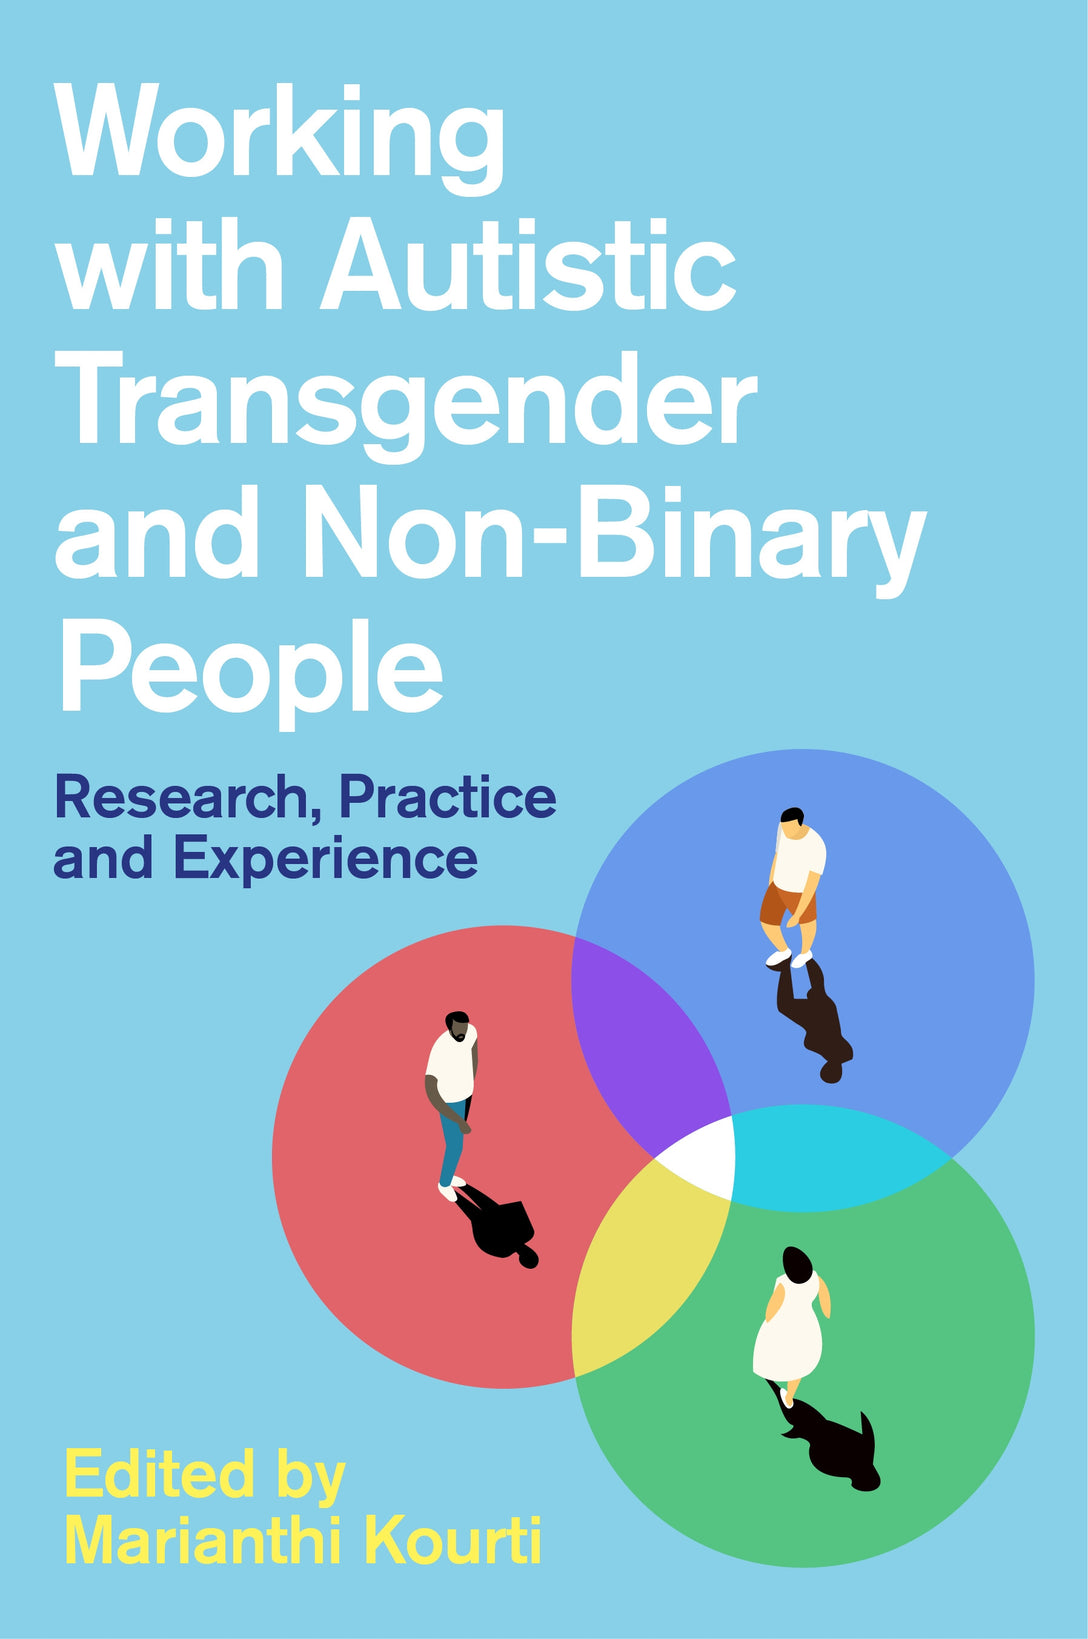 Working with Autistic Transgender and Non-Binary People by Marianthi Kourti, No Author Listed